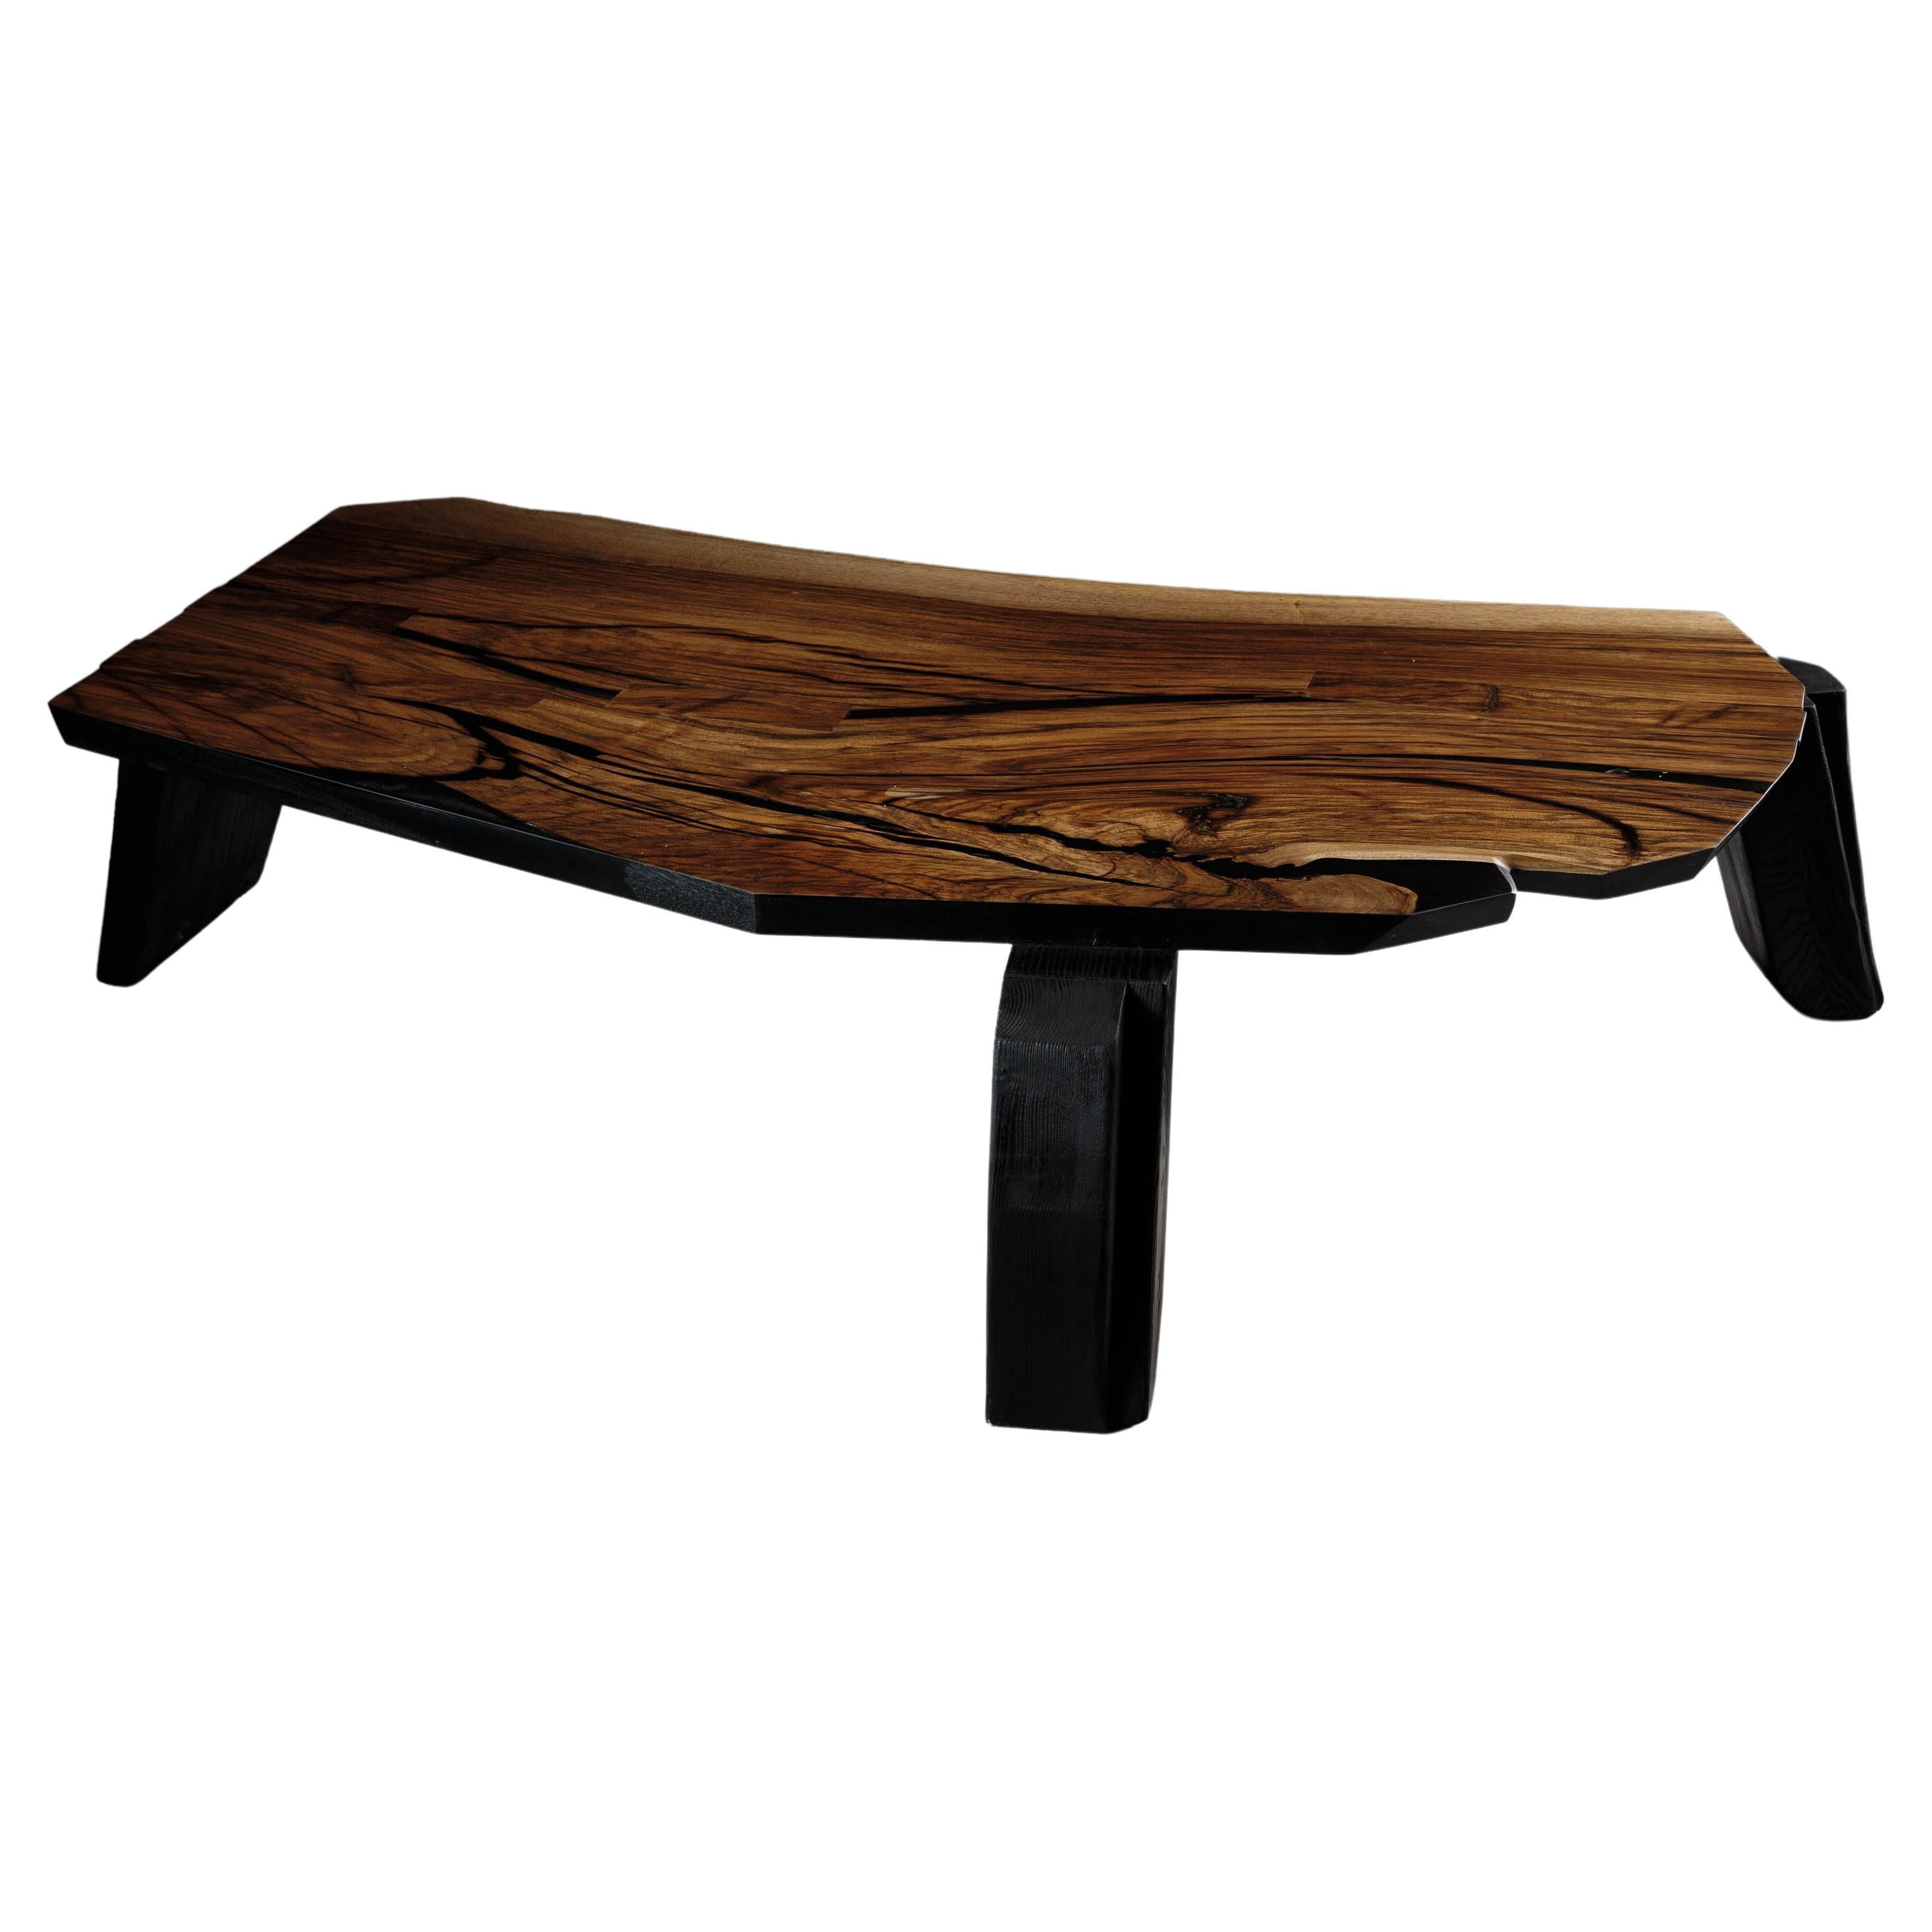 EM102 Coffee Table by Eero Moss For Sale